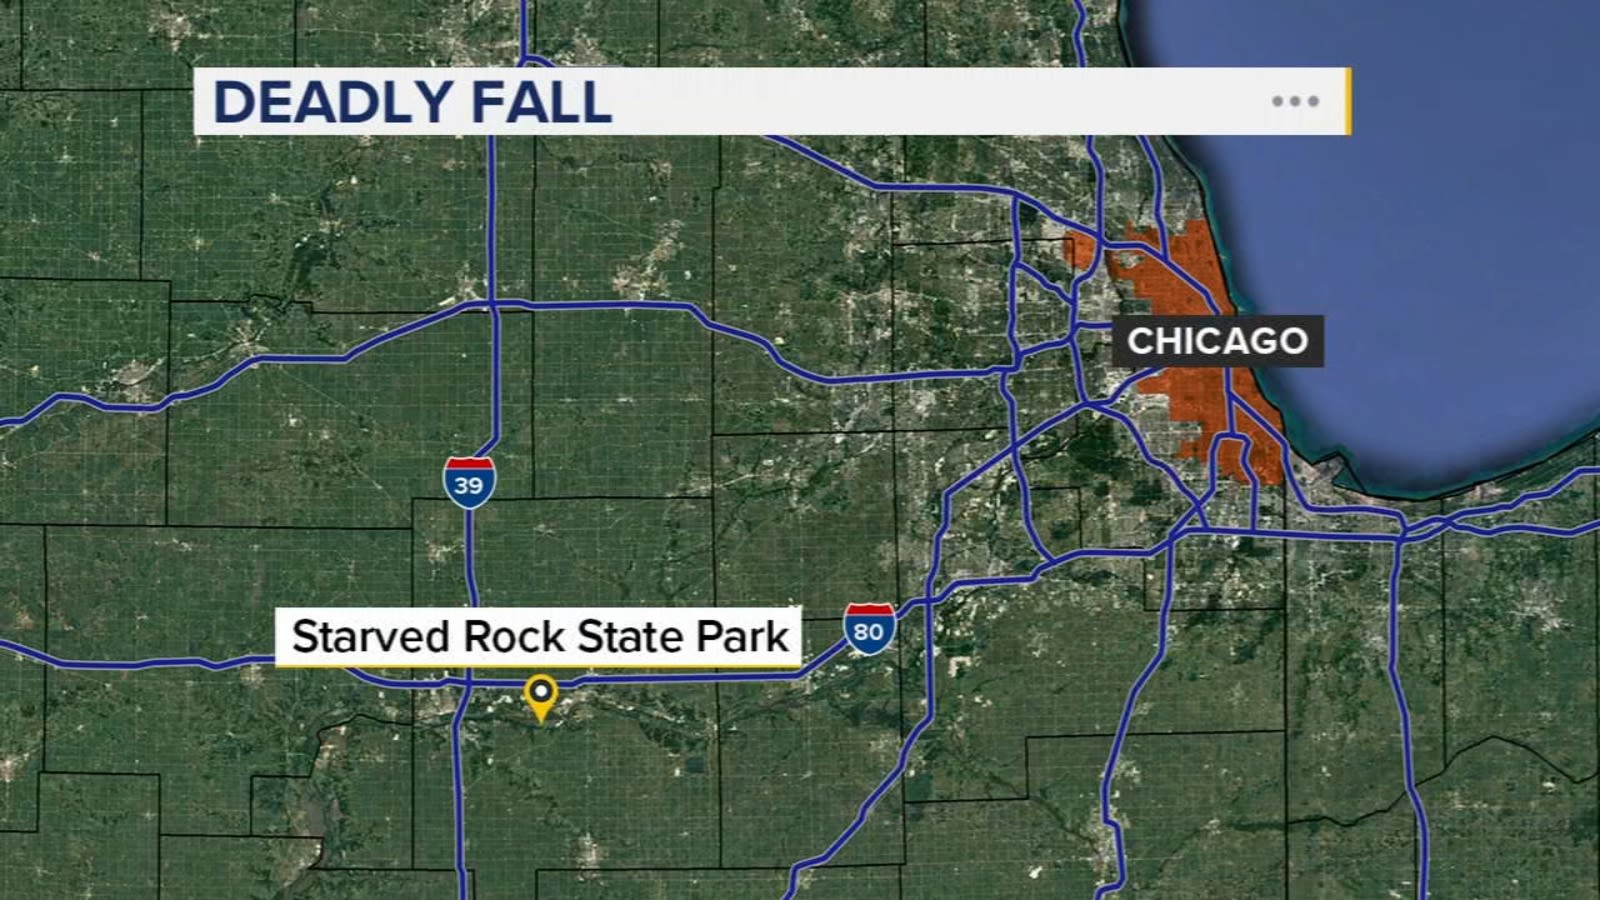 Person dies after falling at Starved Rock State Park in LaSalle County: Illinois DNR